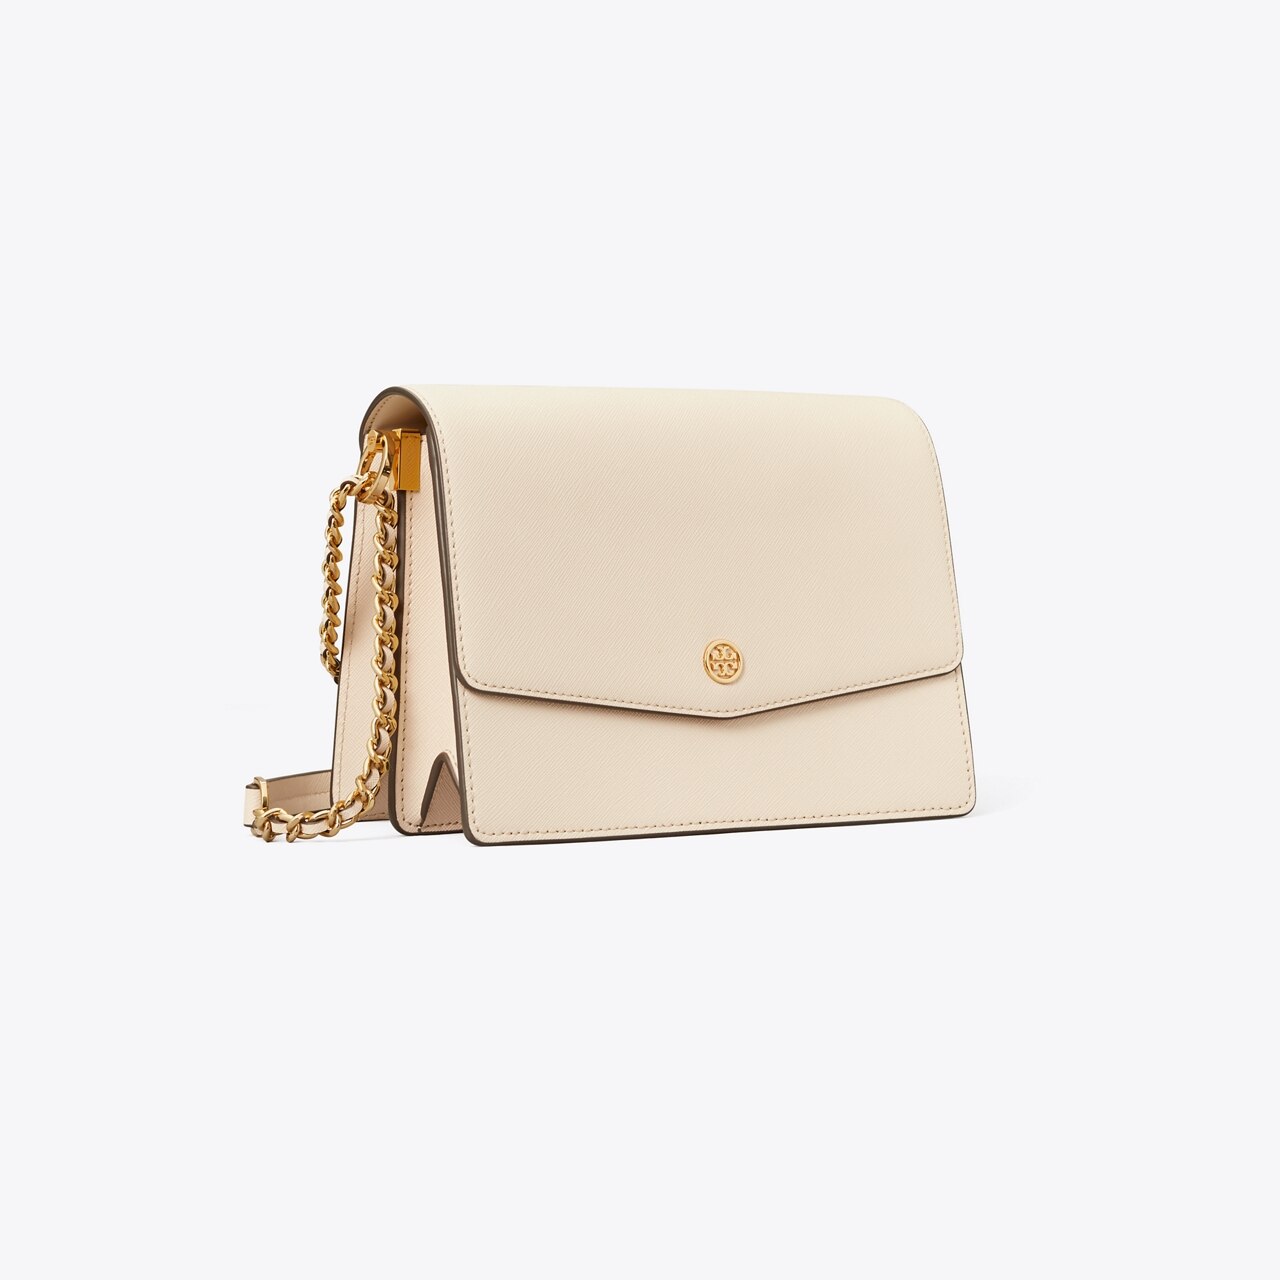 Tory Burch Robinson Colorblock Convertible Leather Shoulder Bag in Natural